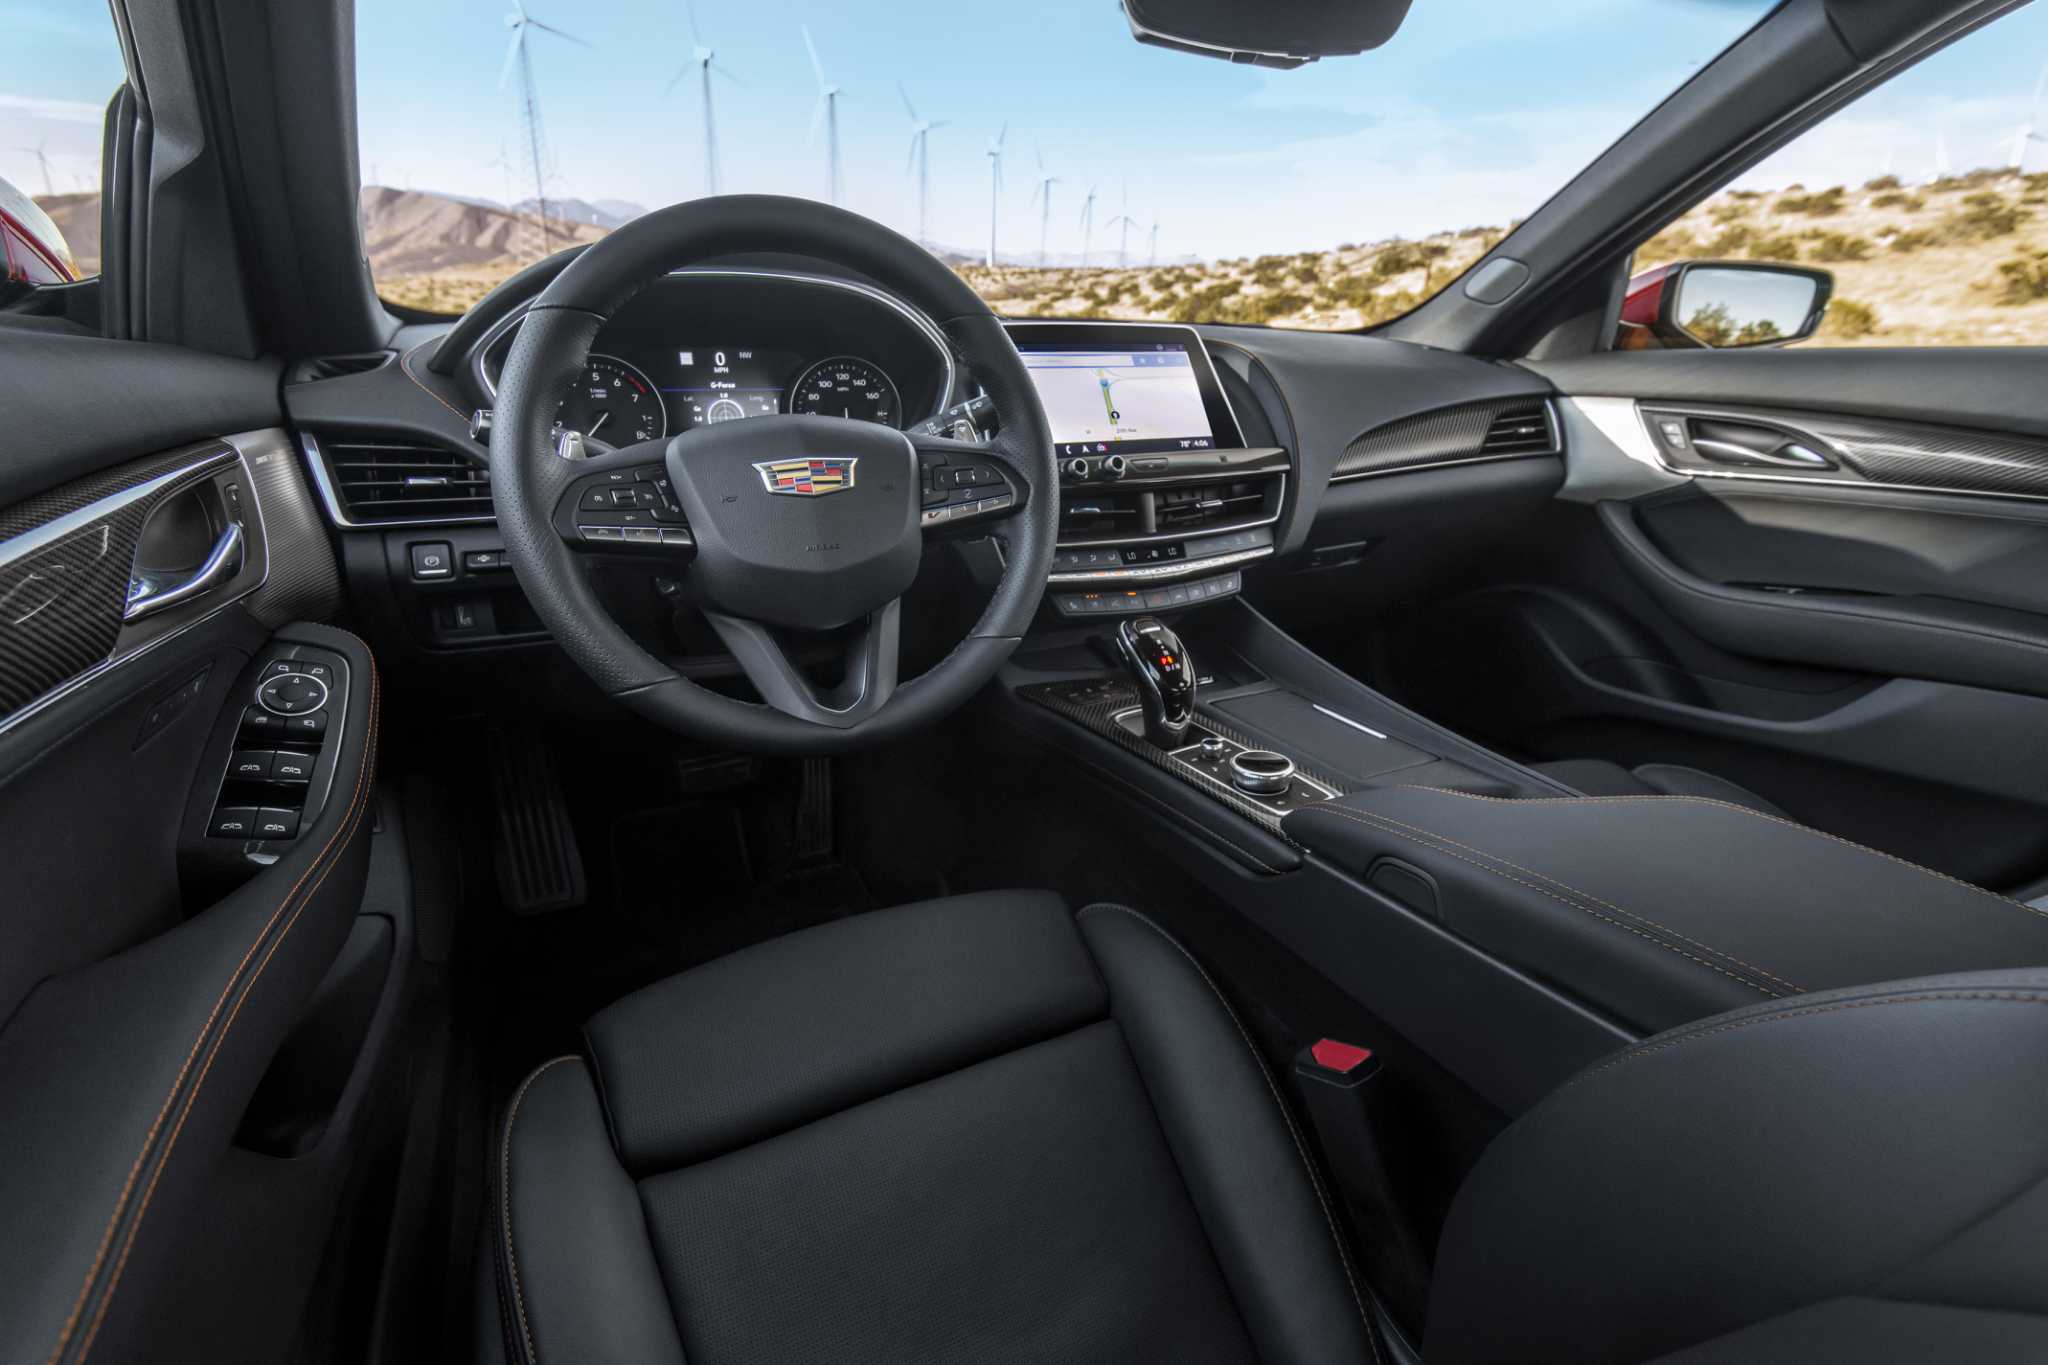 Driving: The 2020 Cadillac CT5 is a luxury and premium driver's flagship